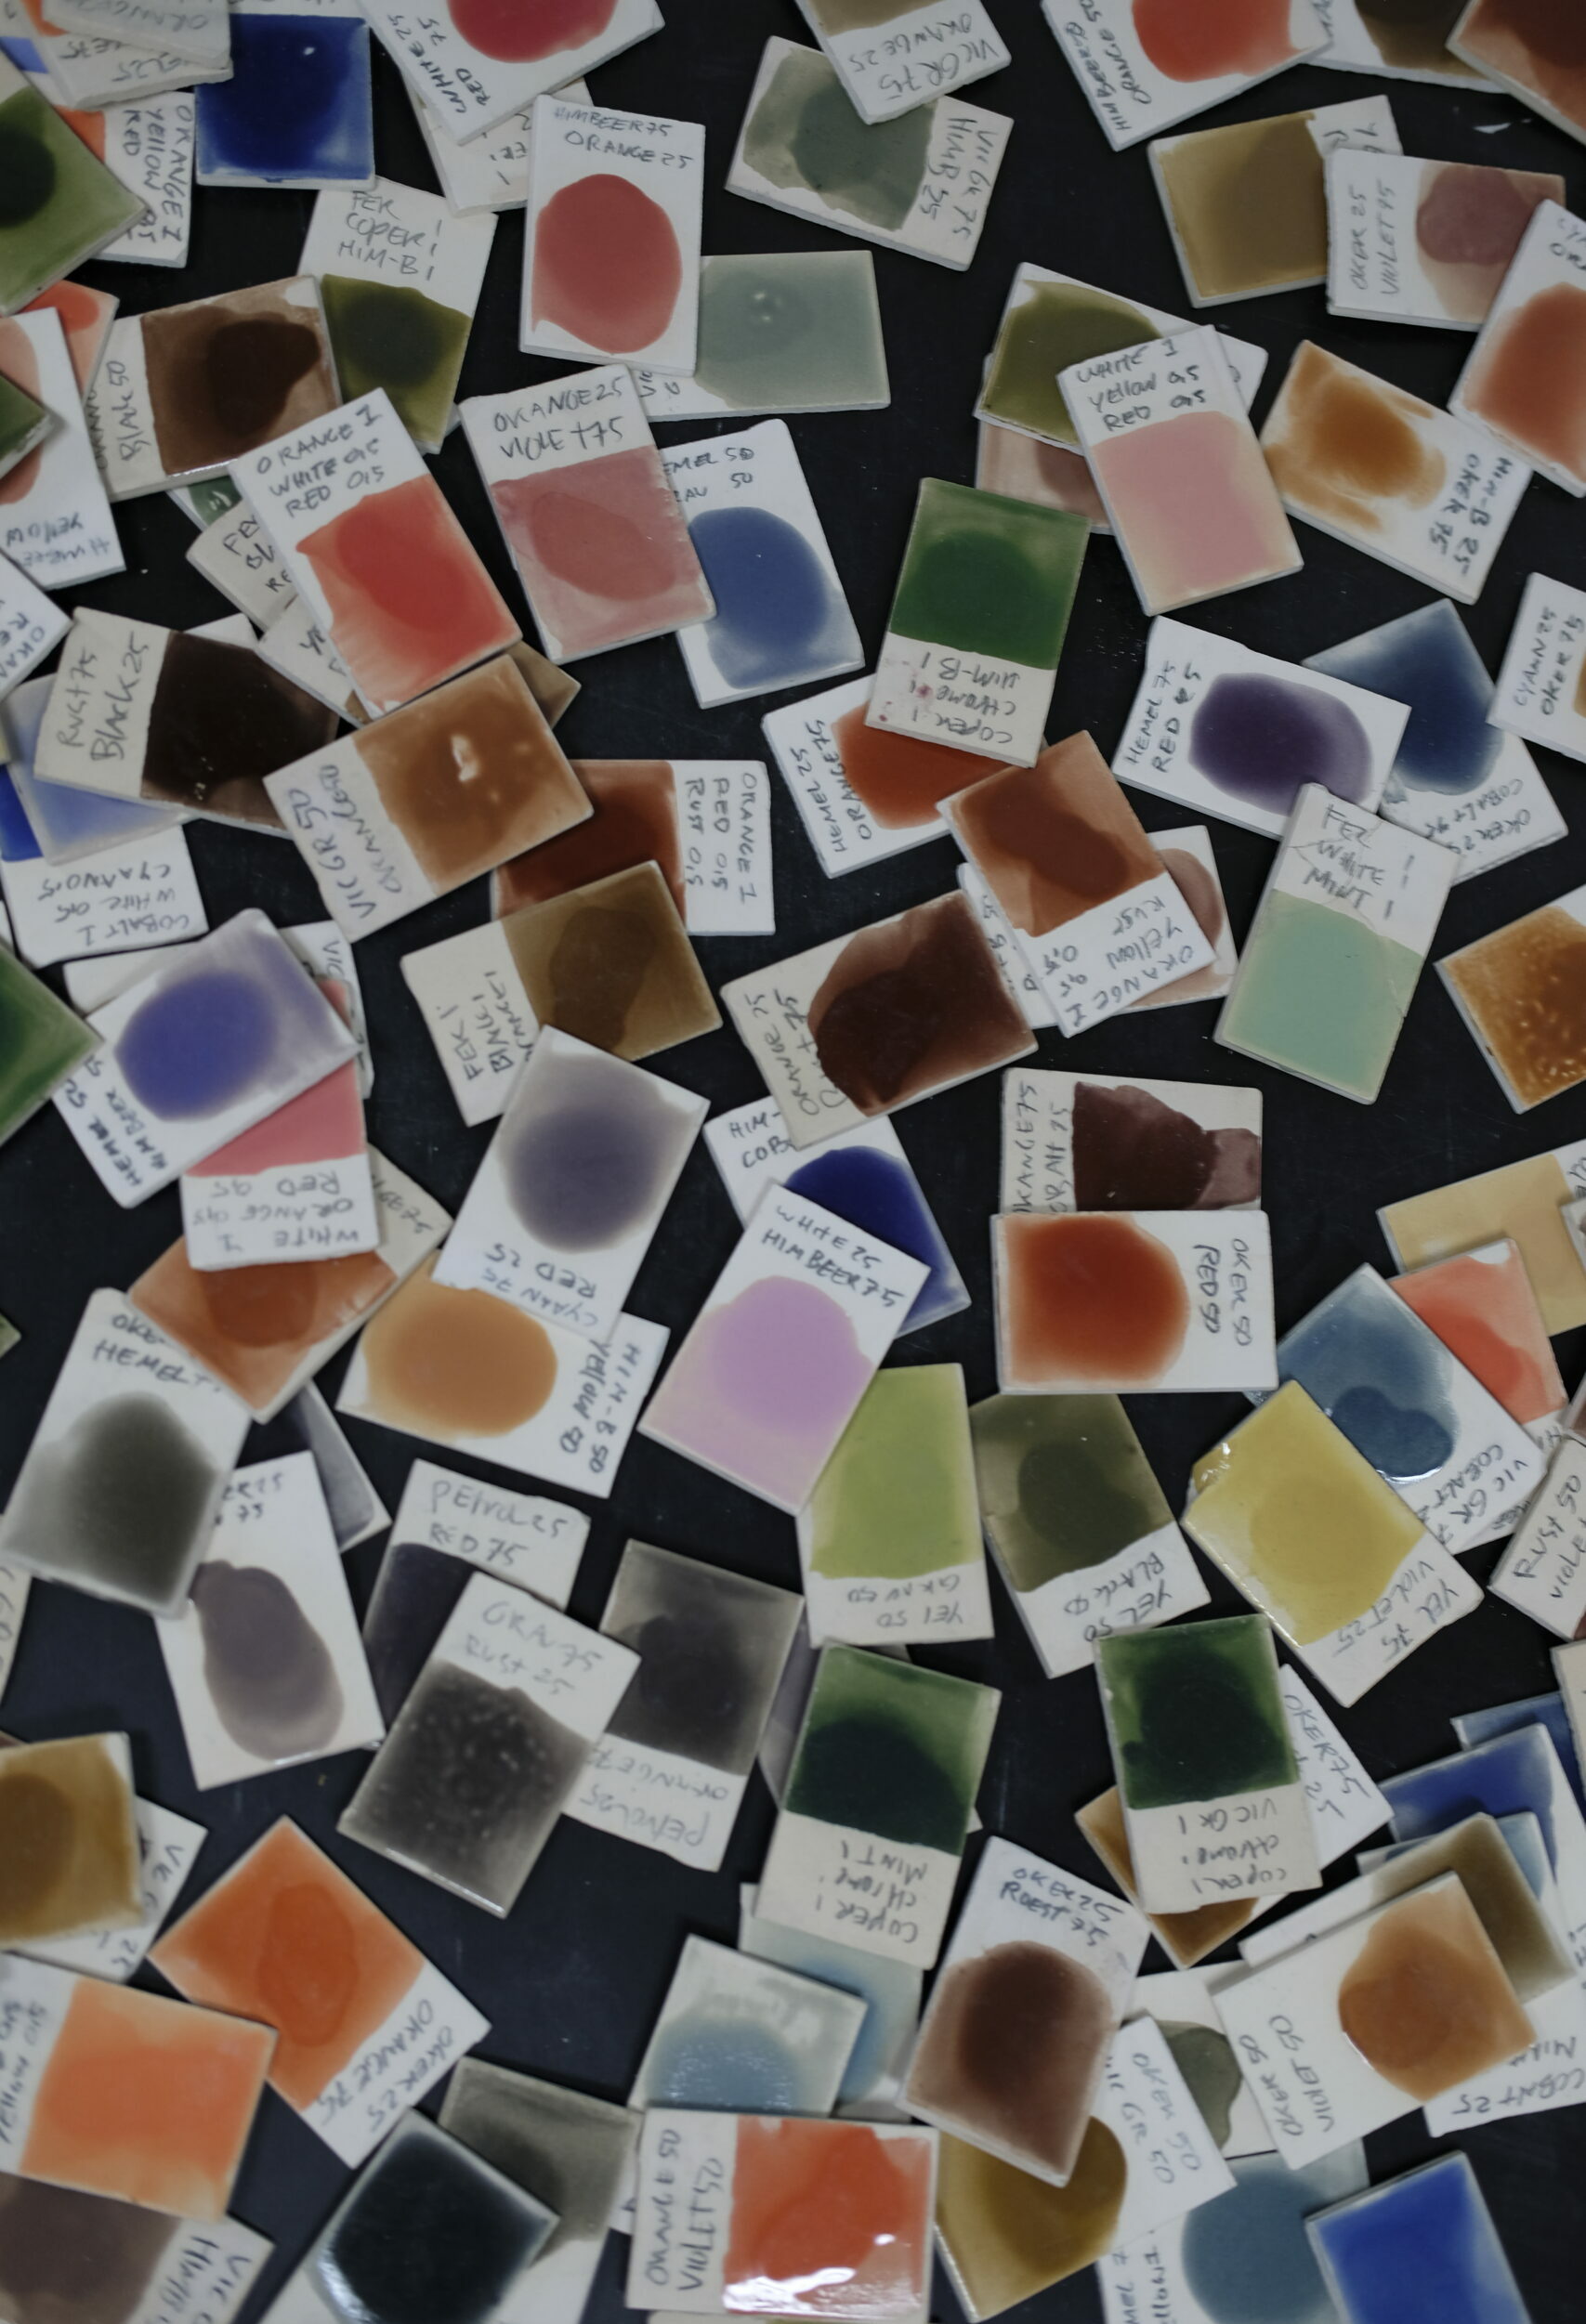 Dozens of small cards with glaze samples in various colors are scattered on a black table. Each card has a description of the glaze number and name.